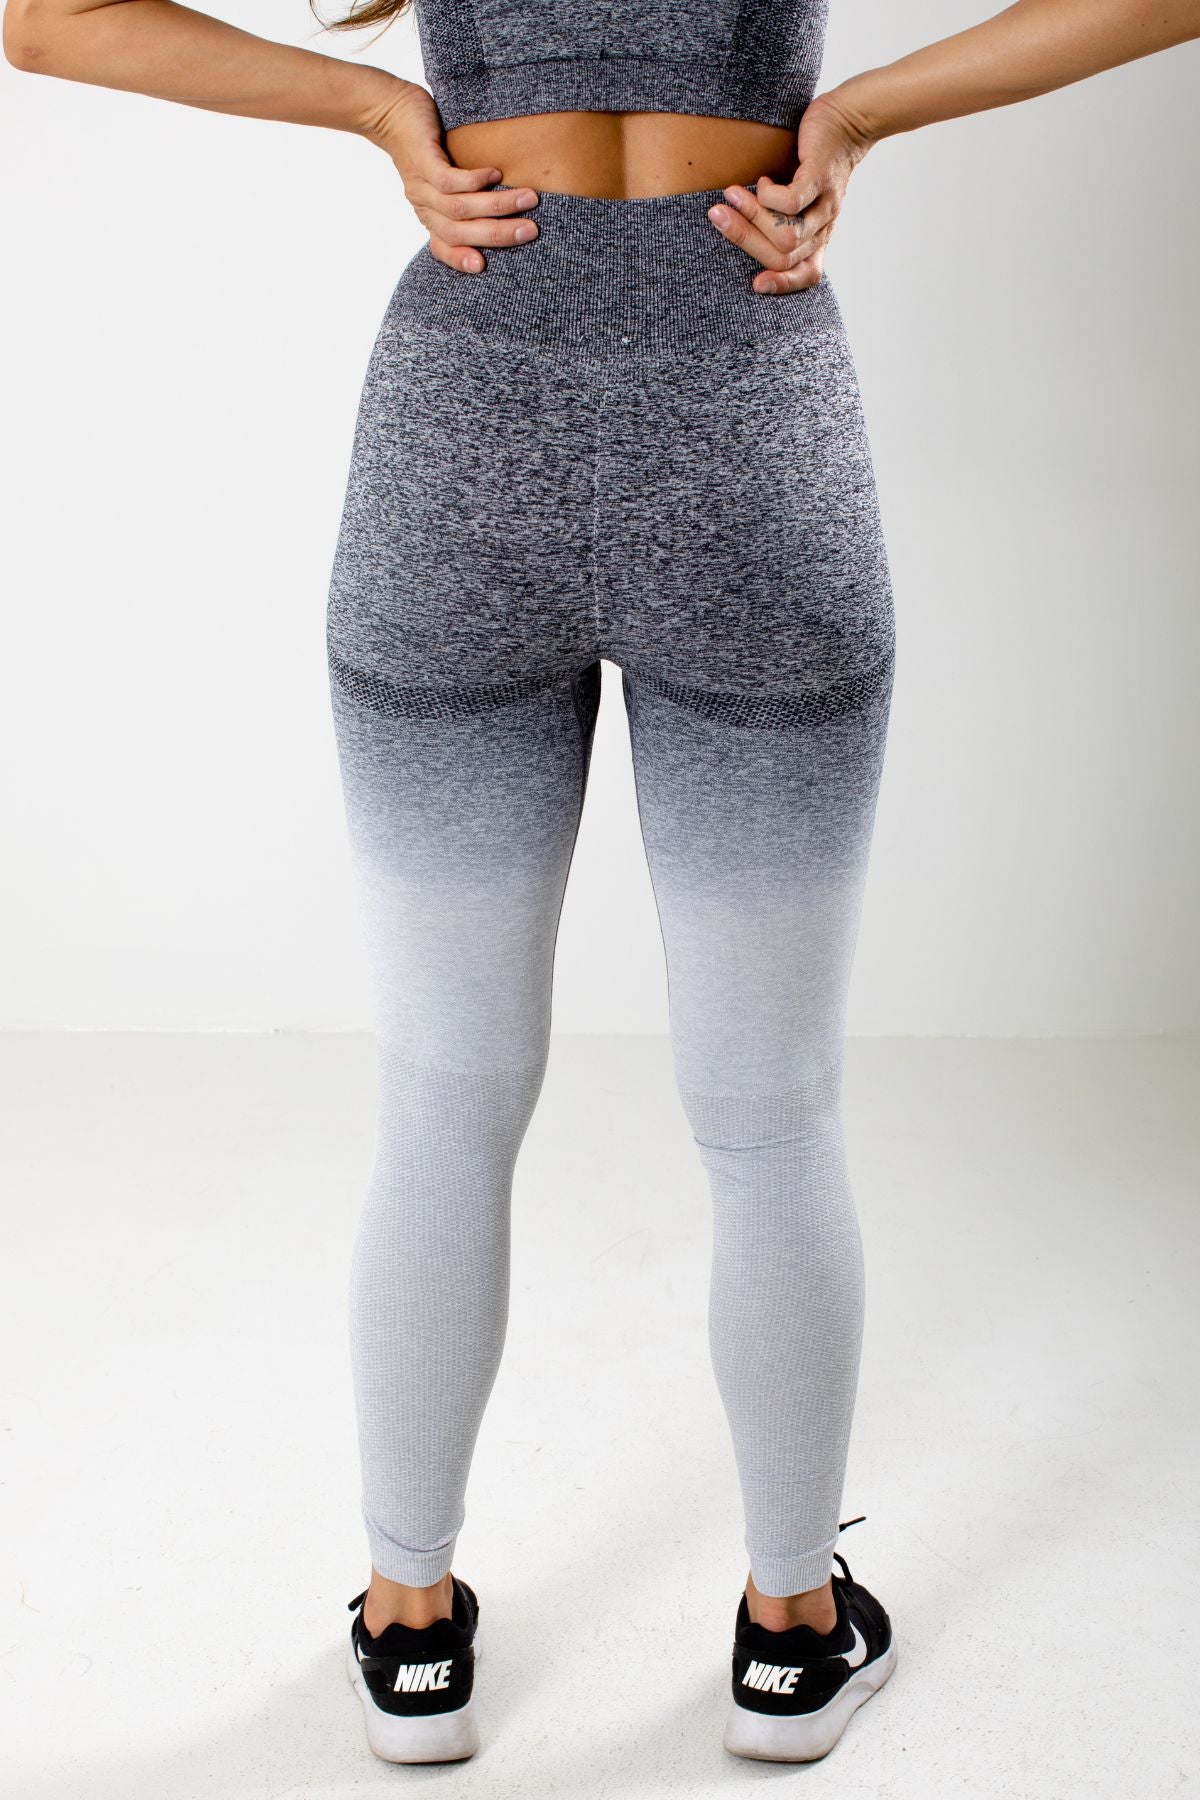 Women's Gray Cute and Comfortable Boutique Activewear Leggings